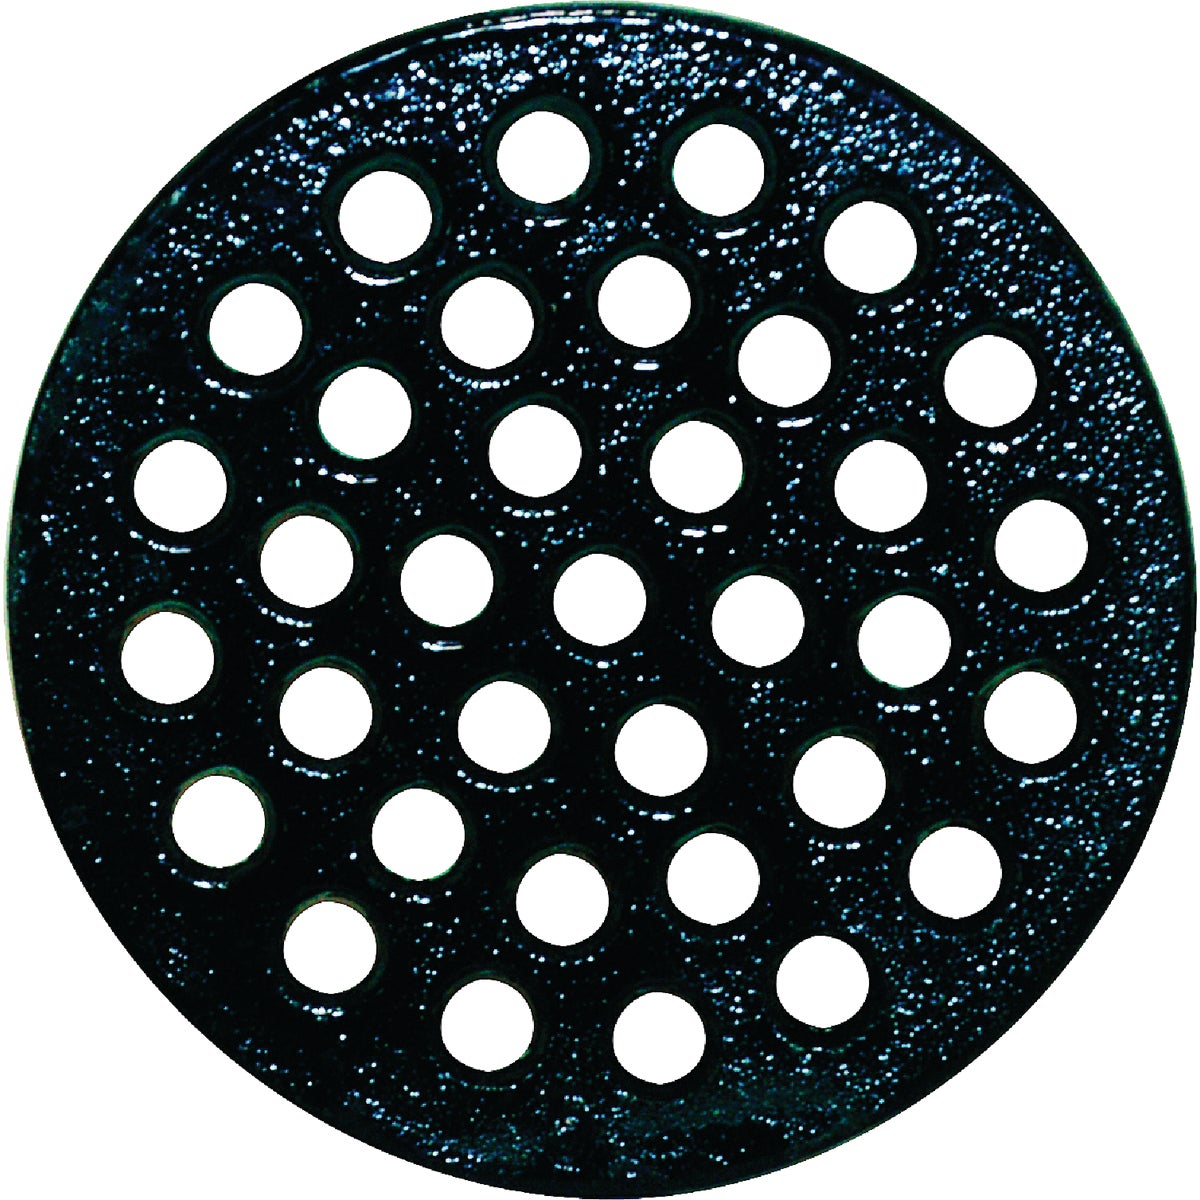 Item 430919, 4-3/8" cast-iron strainer, epoxy-coated for corrosion resistance